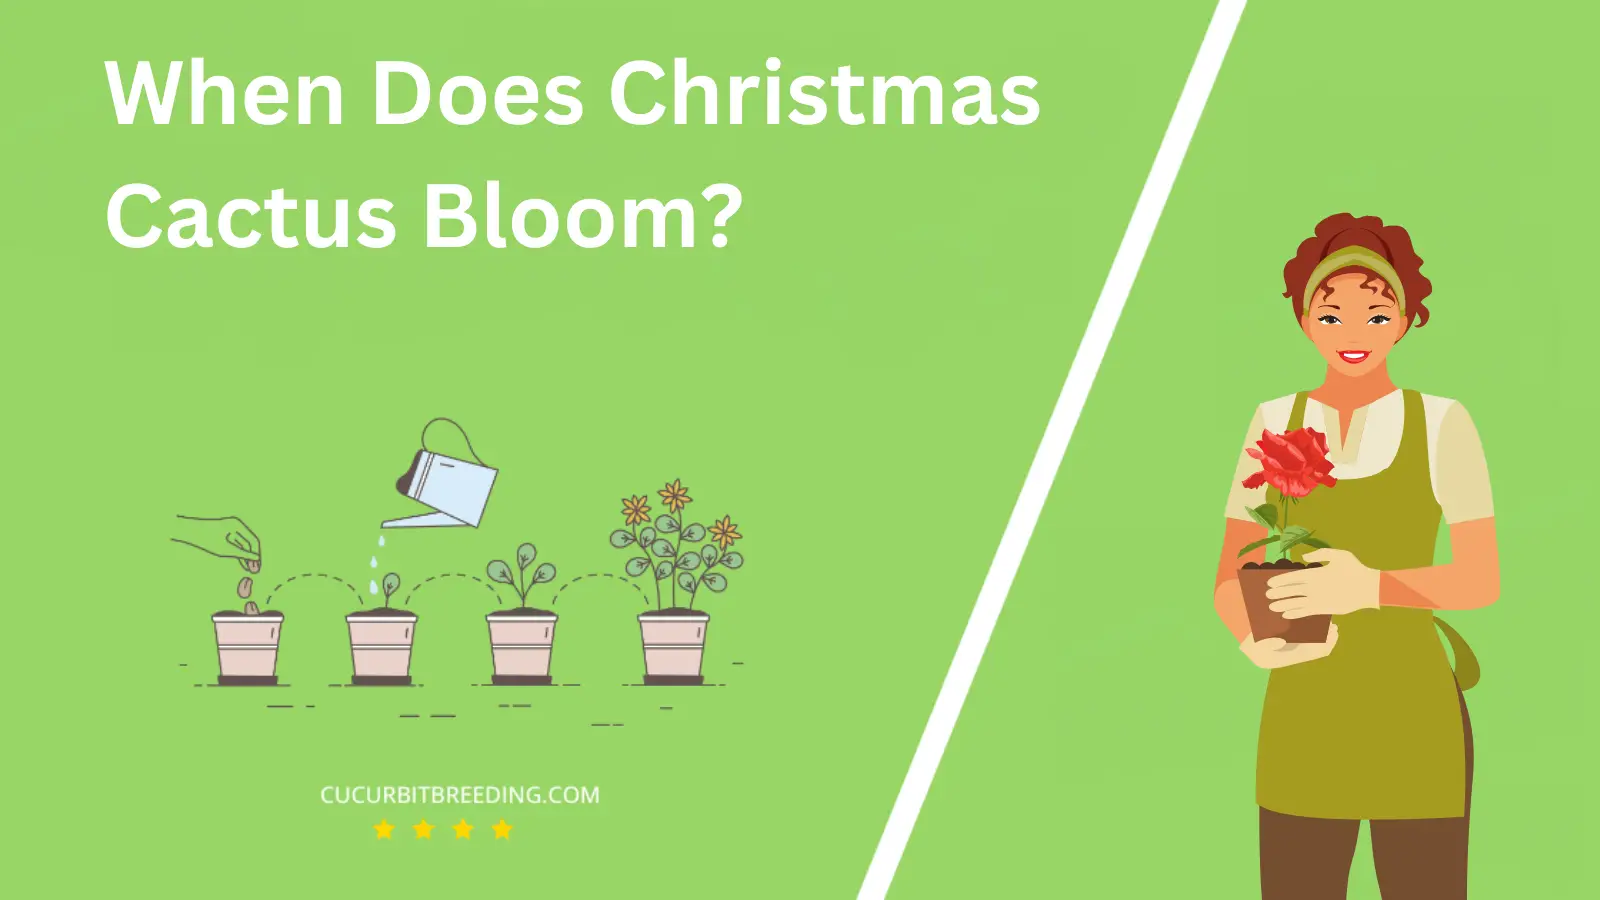 When Does Christmas Cactus Bloom?